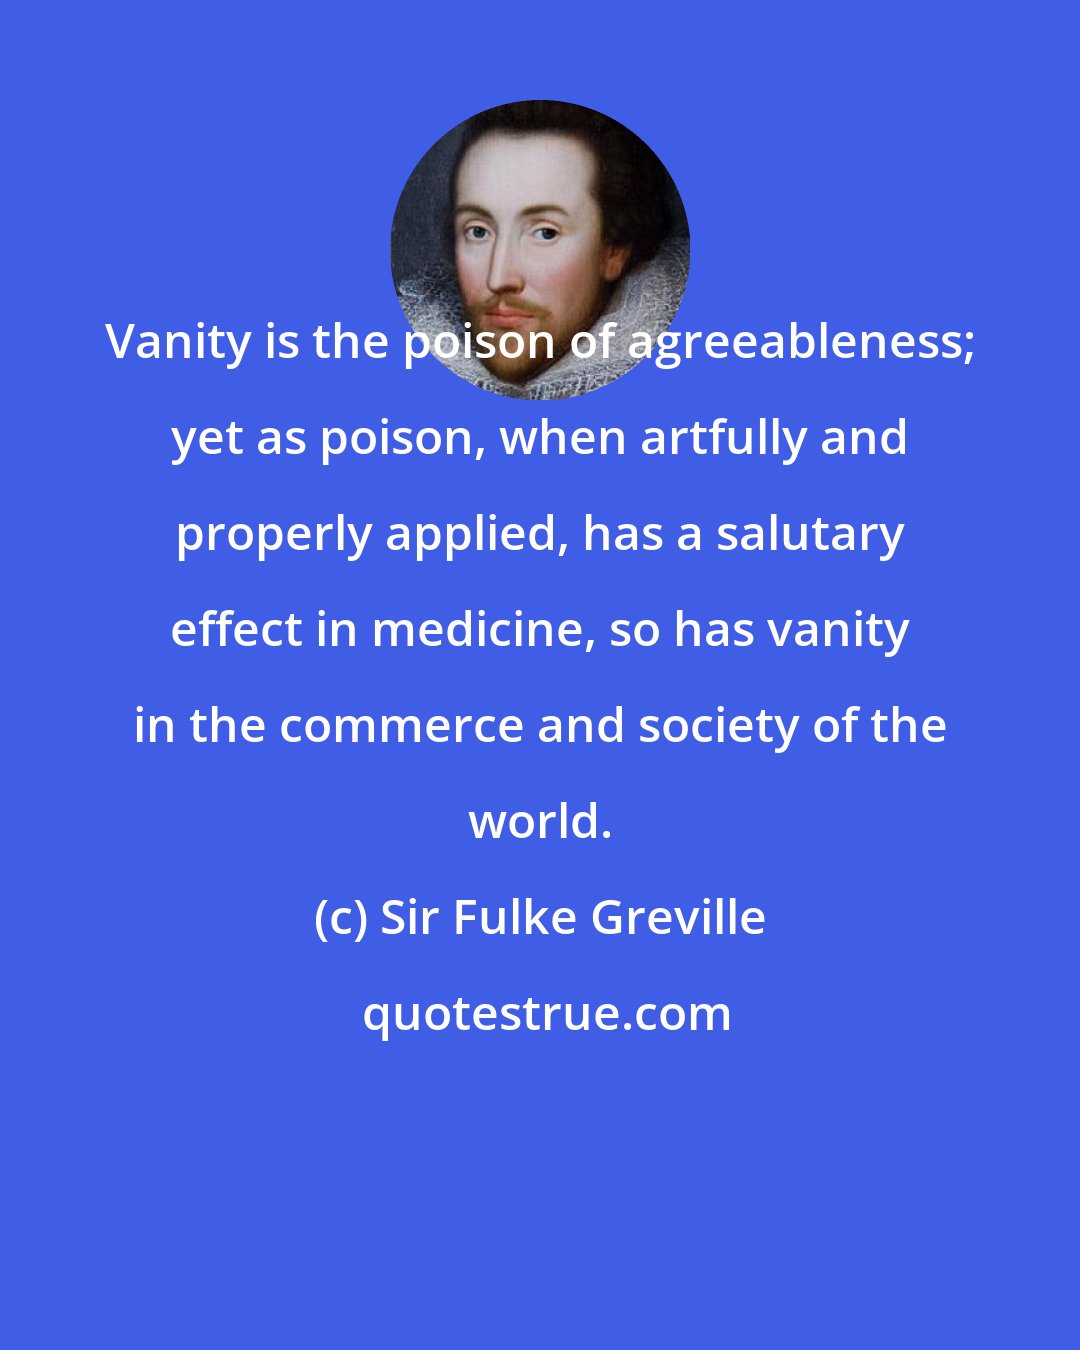 Sir Fulke Greville: Vanity is the poison of agreeableness; yet as poison, when artfully and properly applied, has a salutary effect in medicine, so has vanity in the commerce and society of the world.